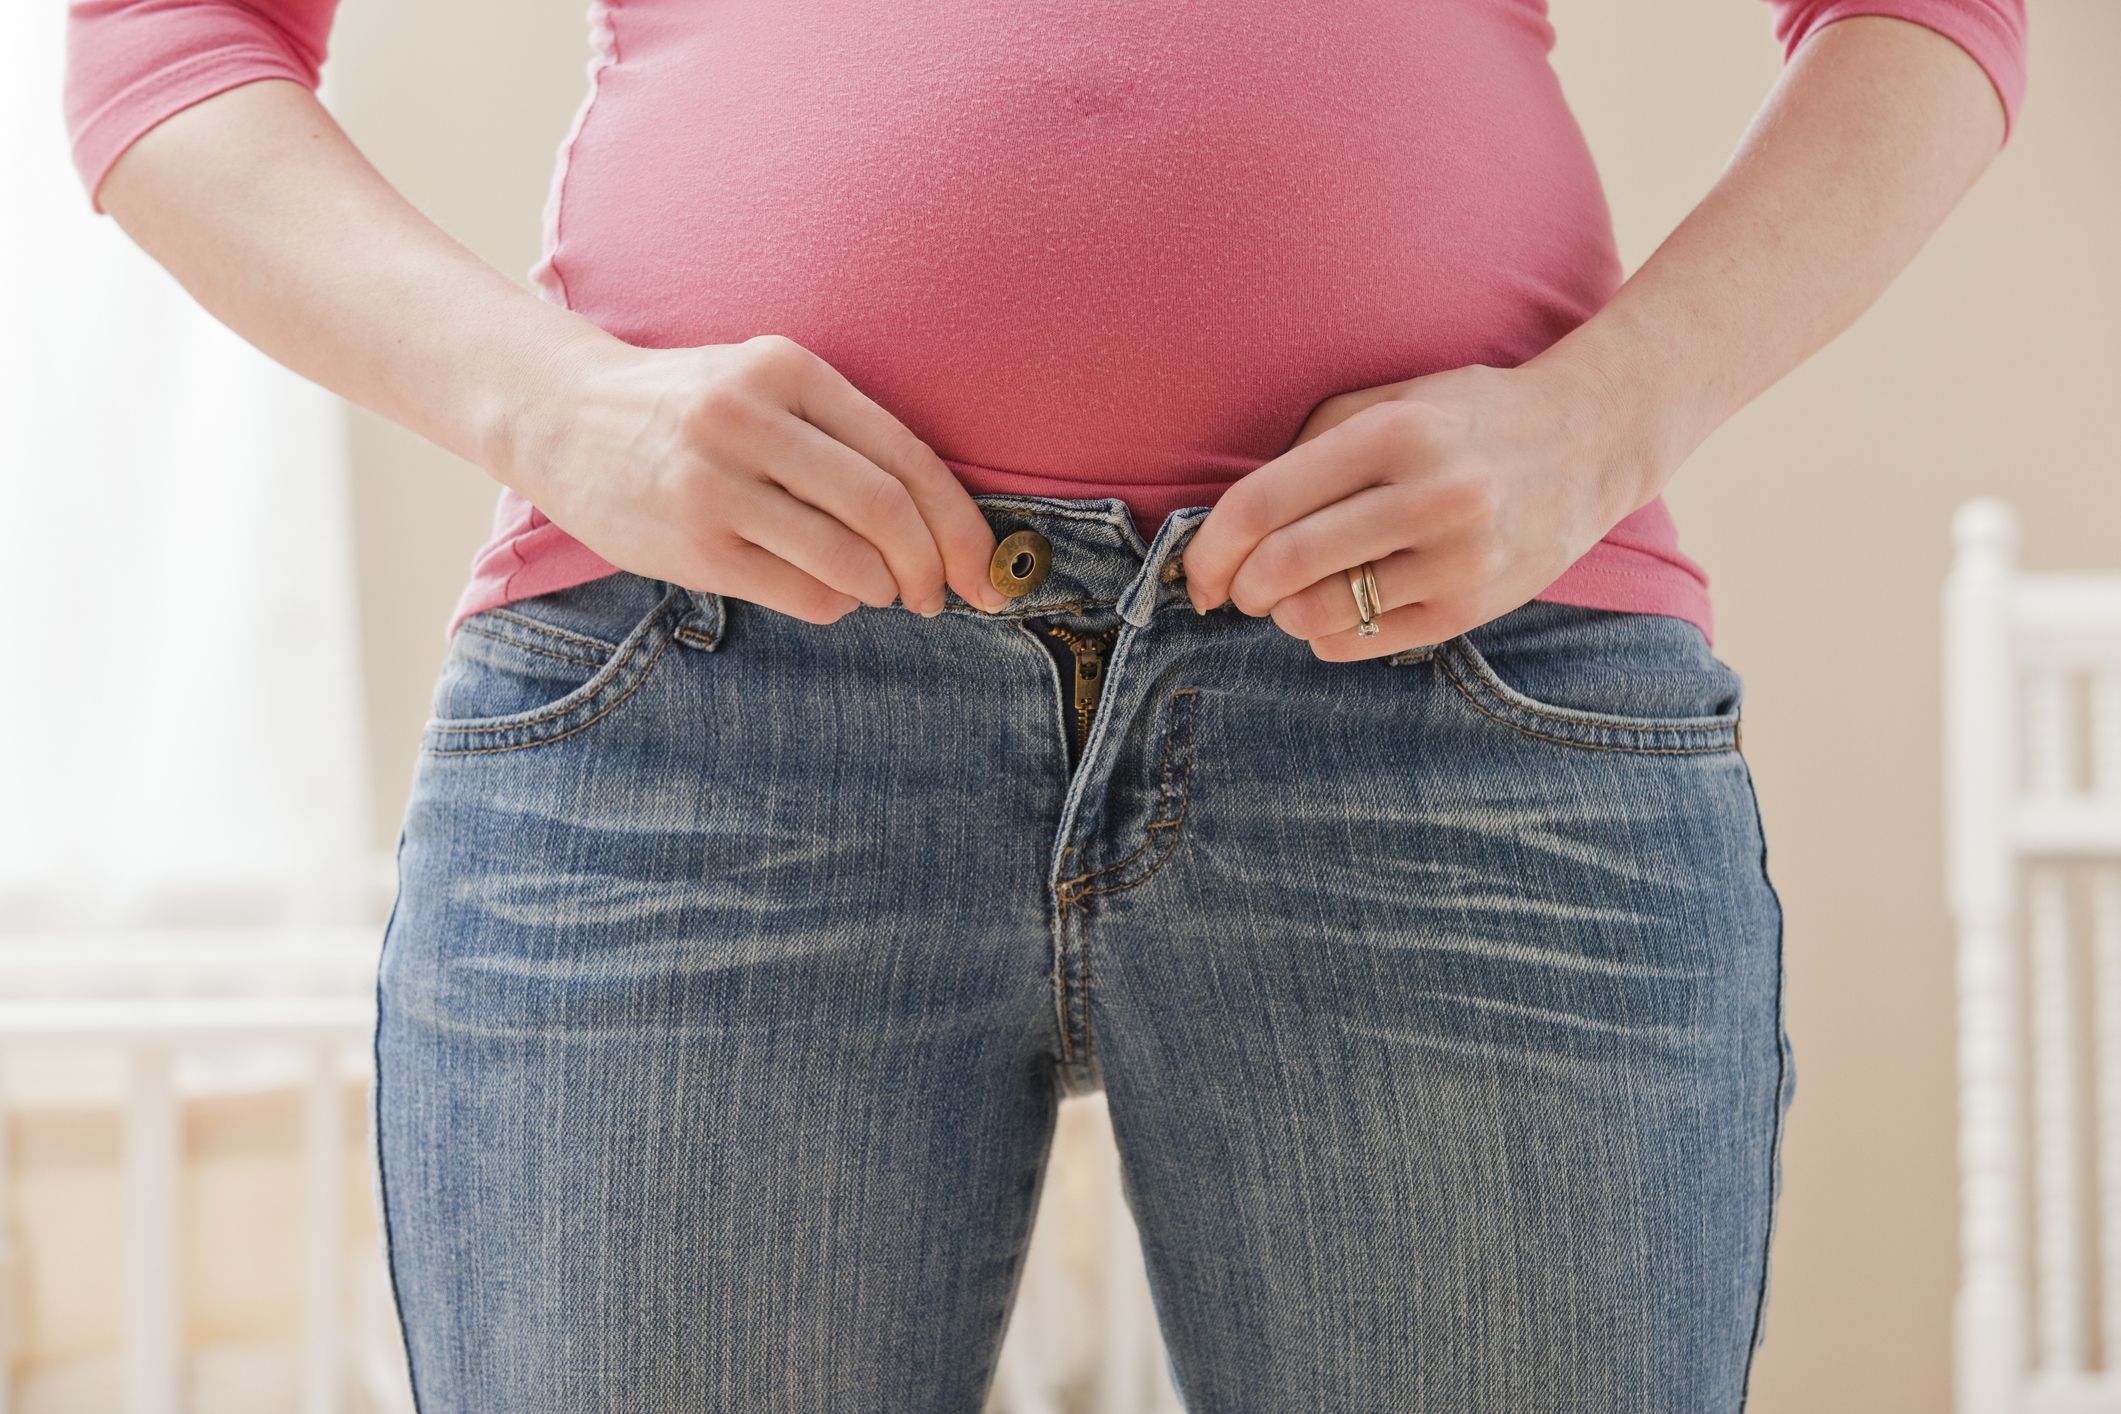 Stomach bloating: The five reasons why your stomach is bloated